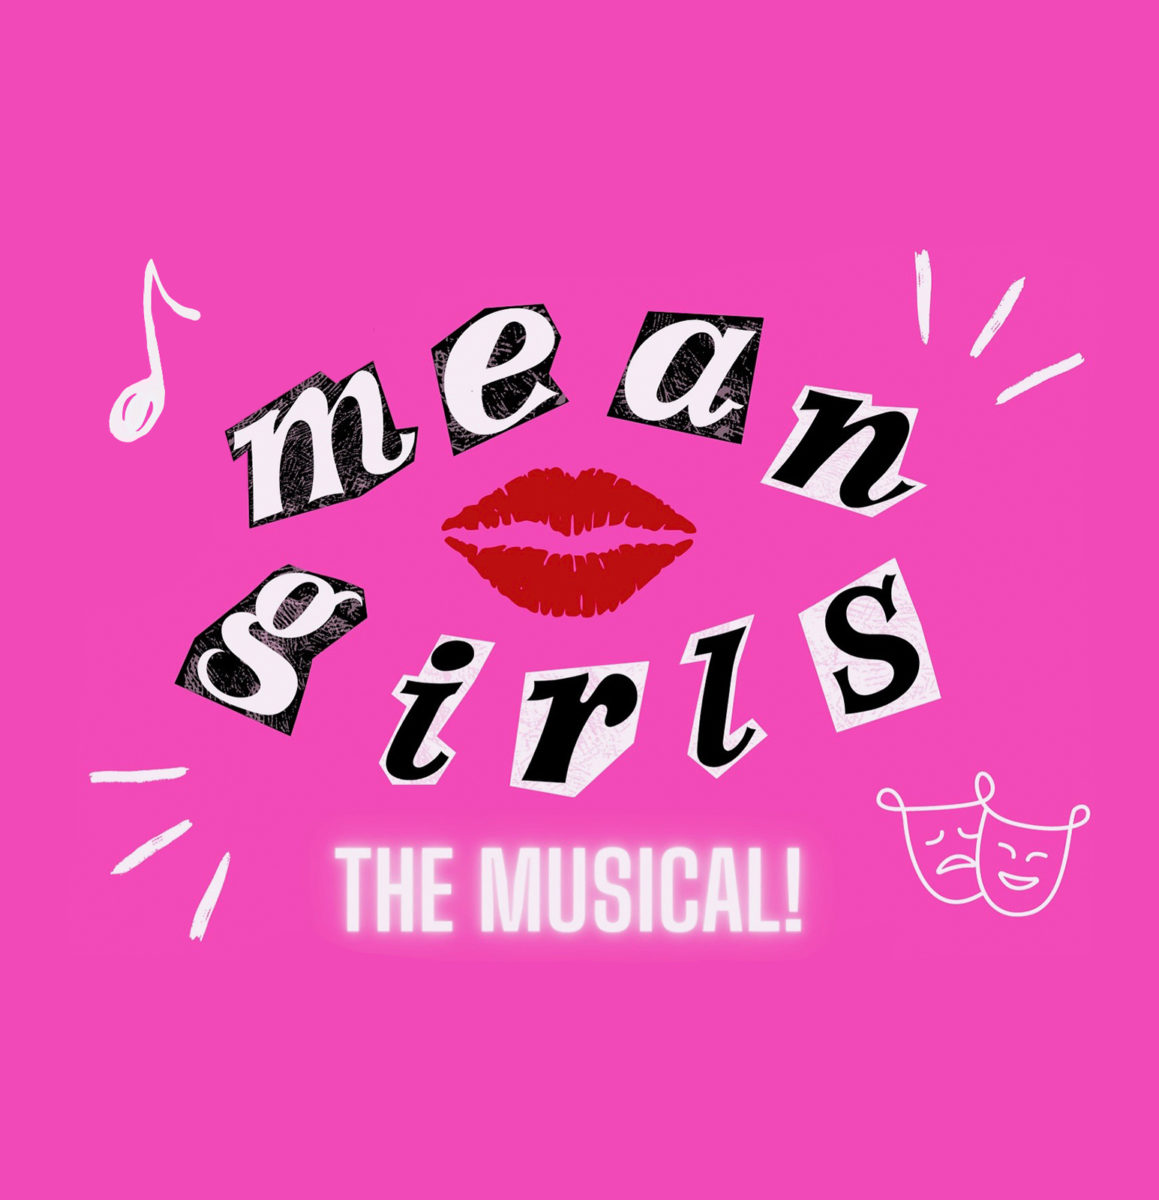 This+years+fall+musical+is+Mean+Girls%2C+playing+December+7th%2C+8th%2C+and+9th.